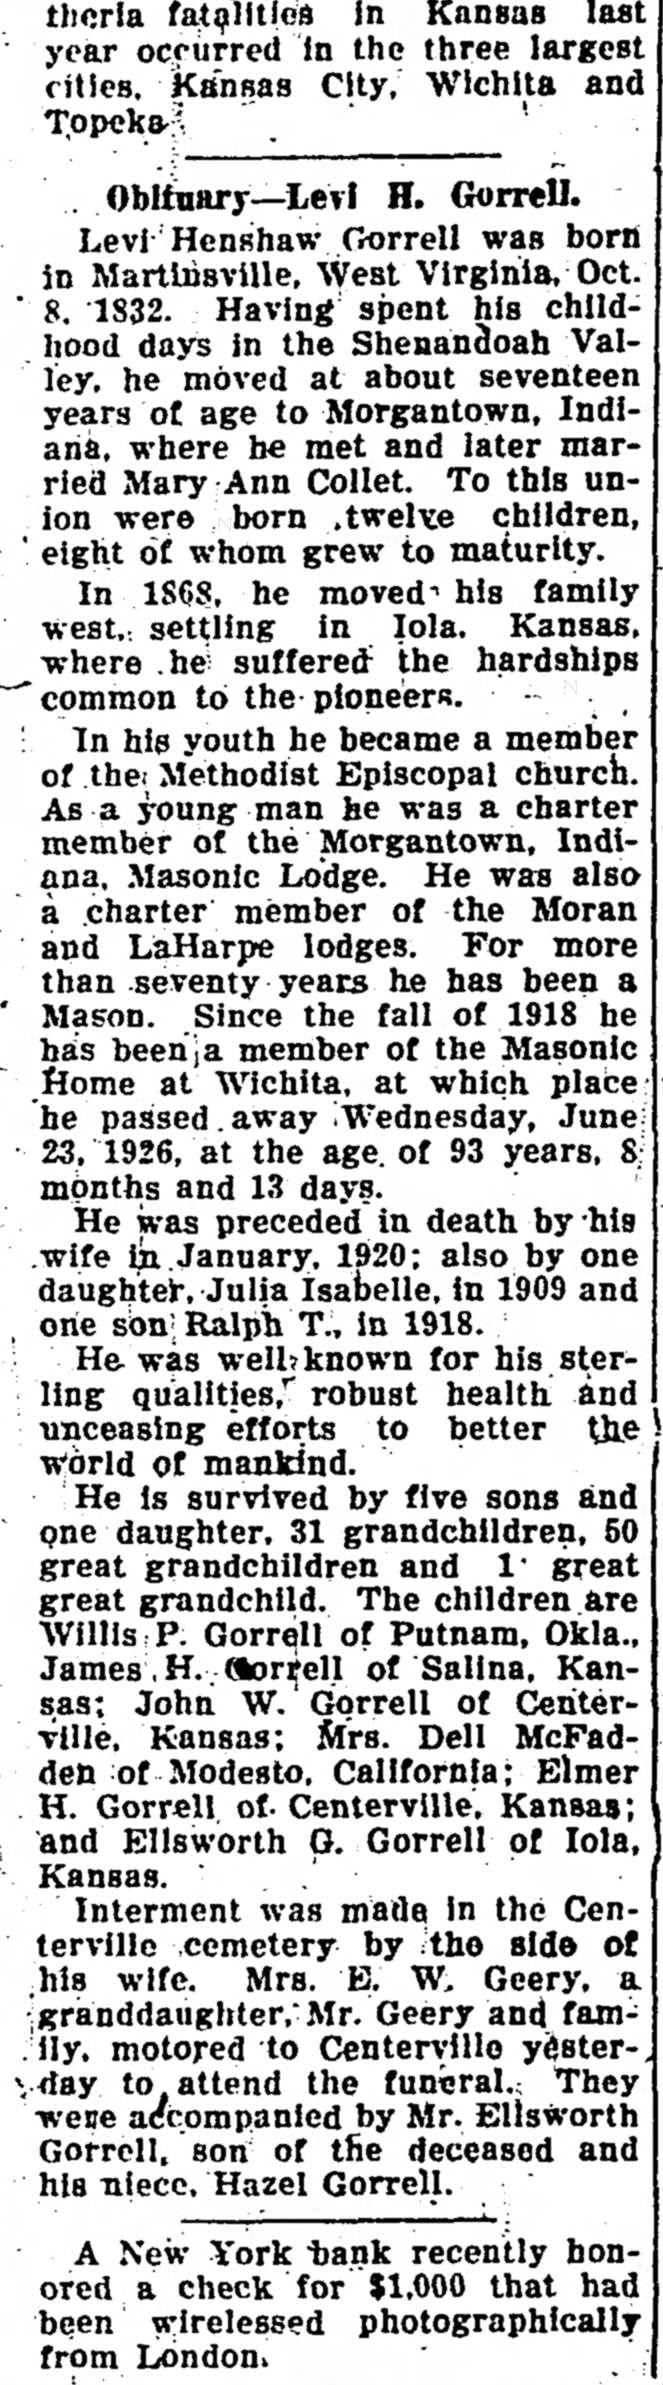 Levi H. Gorrell Obituary Iola Register 26 June 1926 Page 6 Col 1